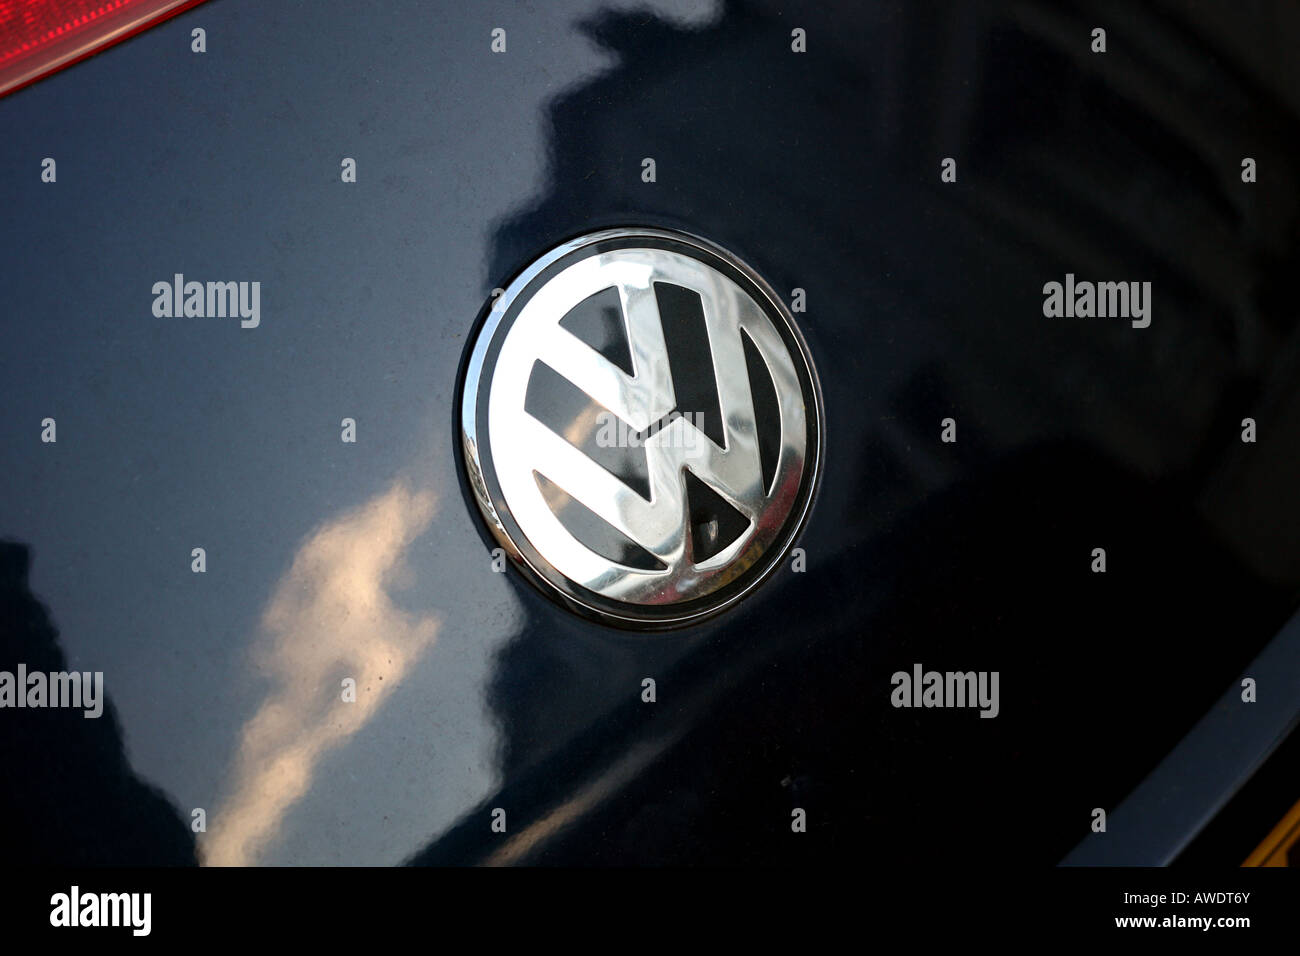 Logo on Volkswagen car: EDITORIAL USE ONLY Stock Photo